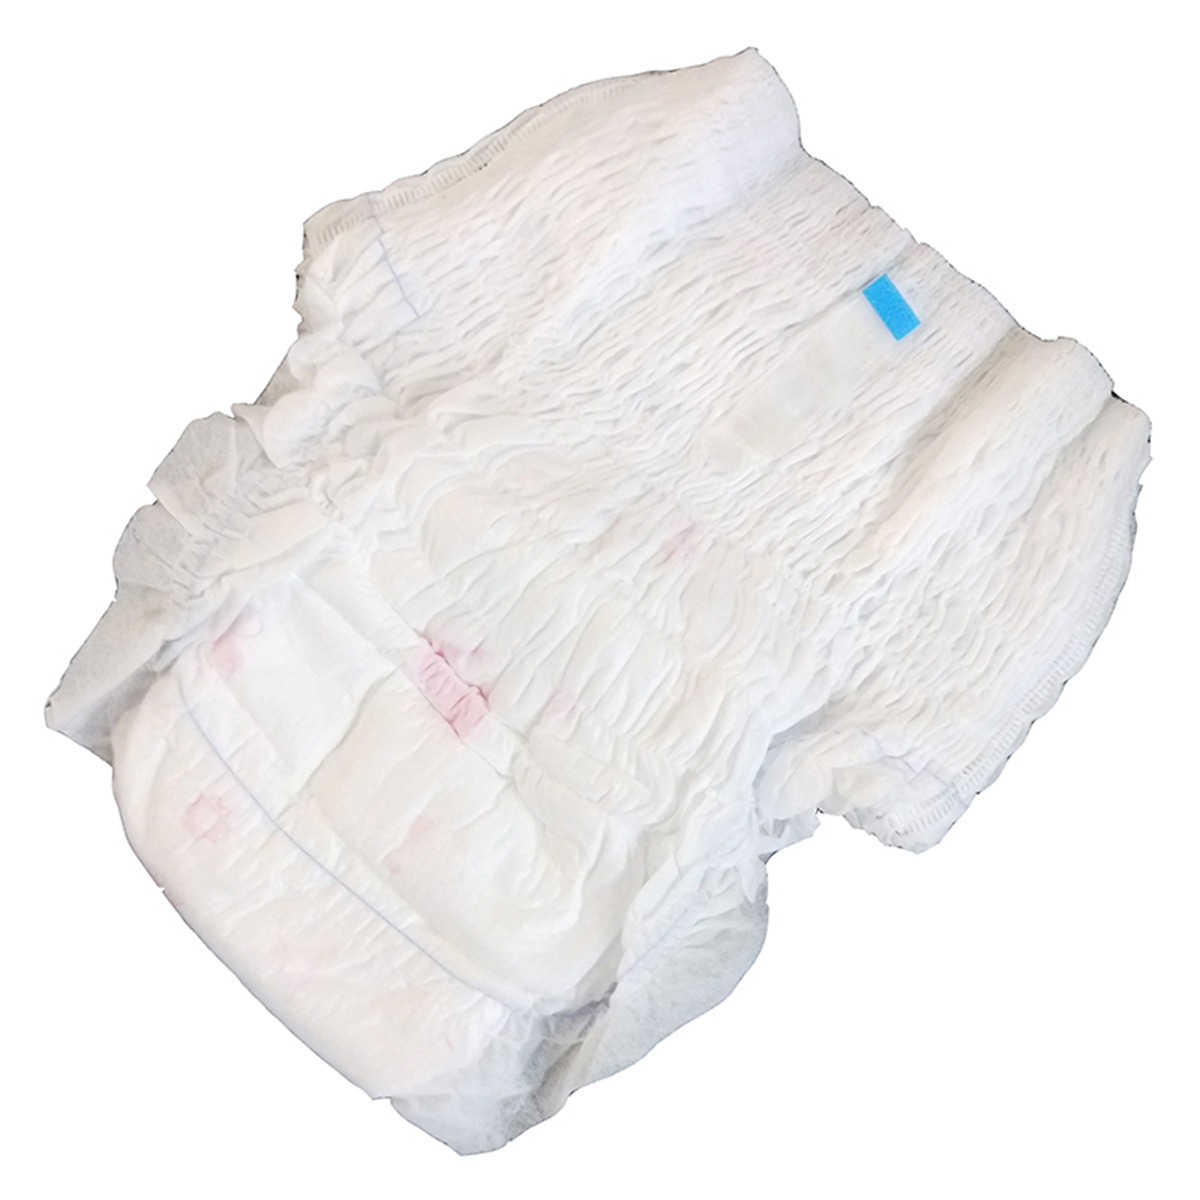 adult diapers online